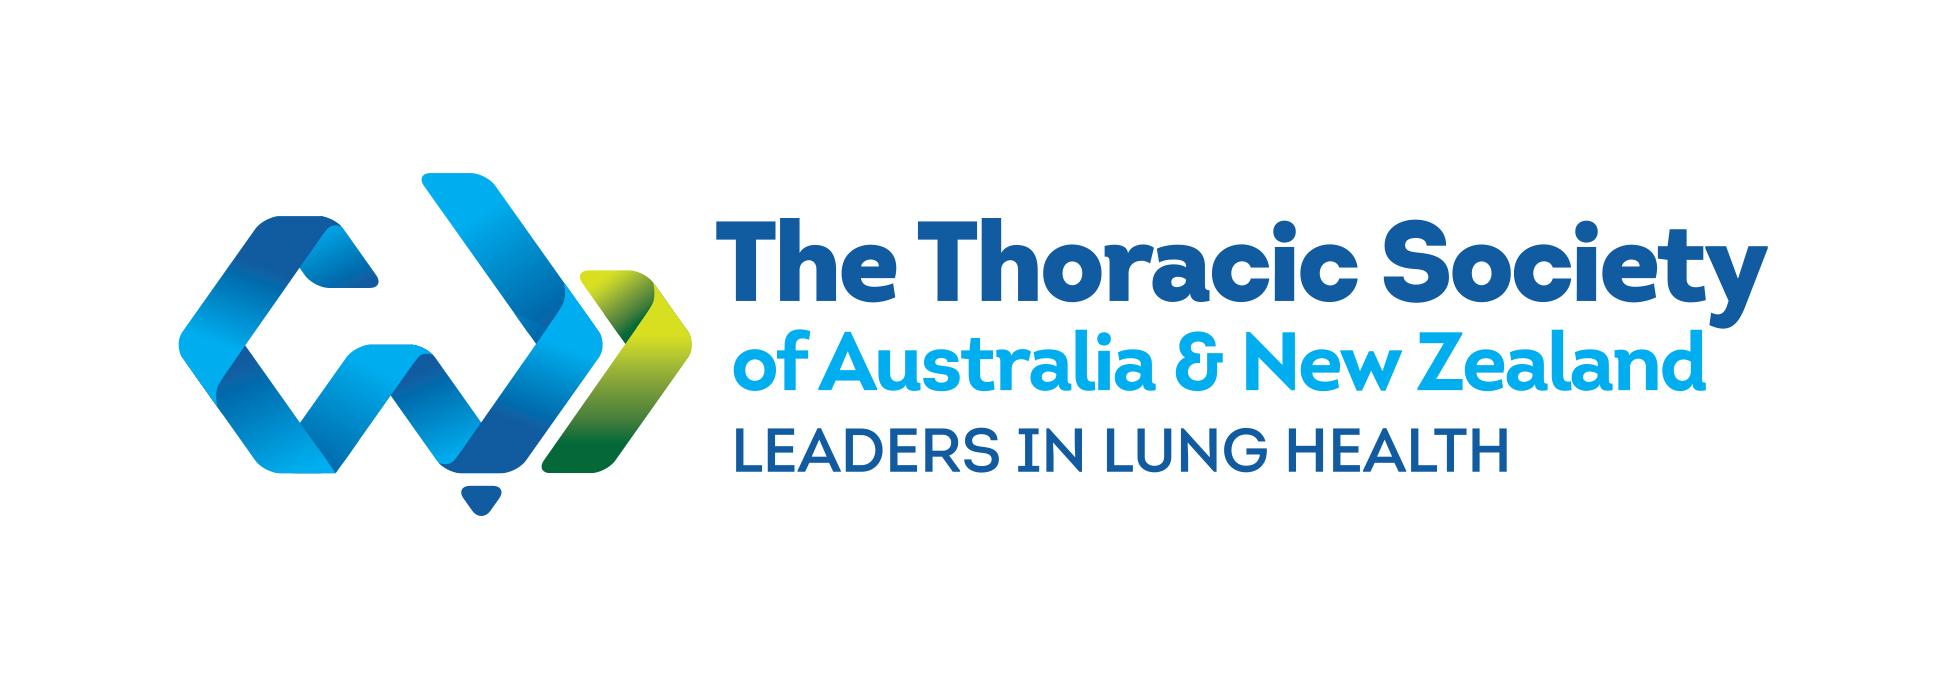 the-thoracic-society-of-australia-and-new-zealand